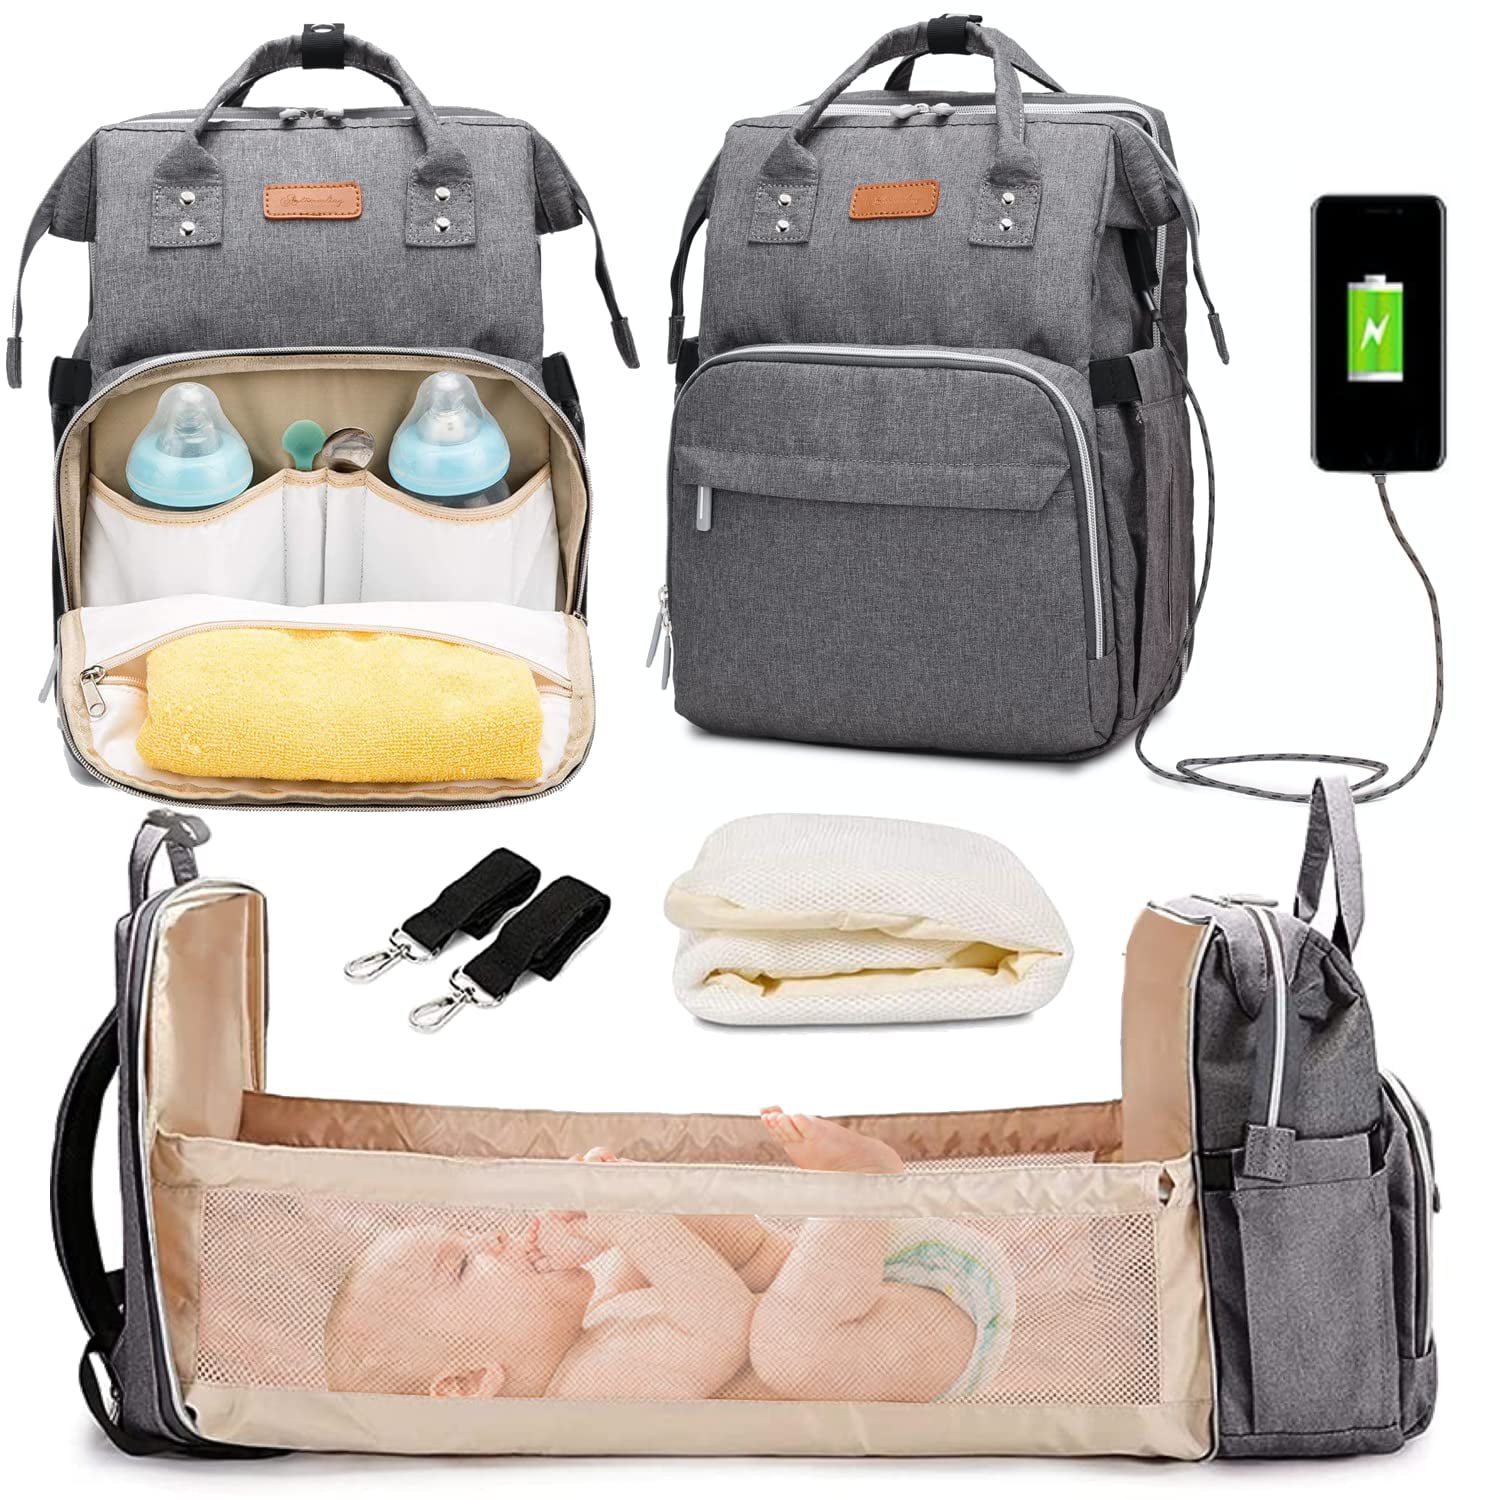 Multi-Function Travel Mommy Bag Diaper Bags for Baby Girls Boys Newborn Essentials Must Haves Baby Shower Gifts Upgraded 3 in 1 Diaper Bag Backpack with Changing Station 